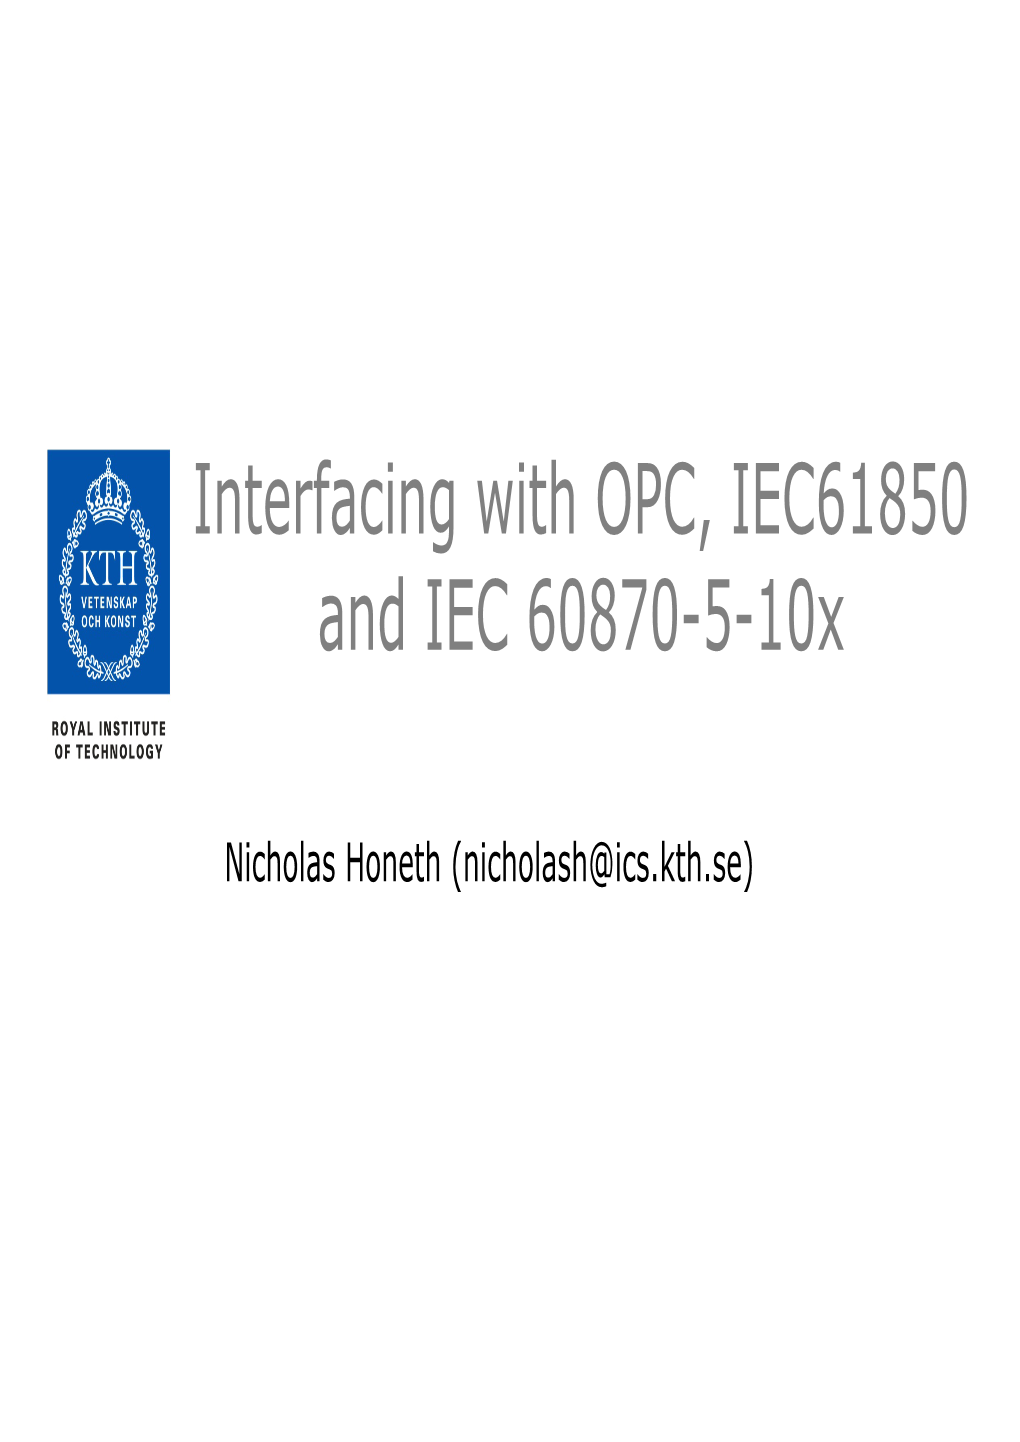 Interfacing with OPC, IEC61850 and IEC 60870-5-10X